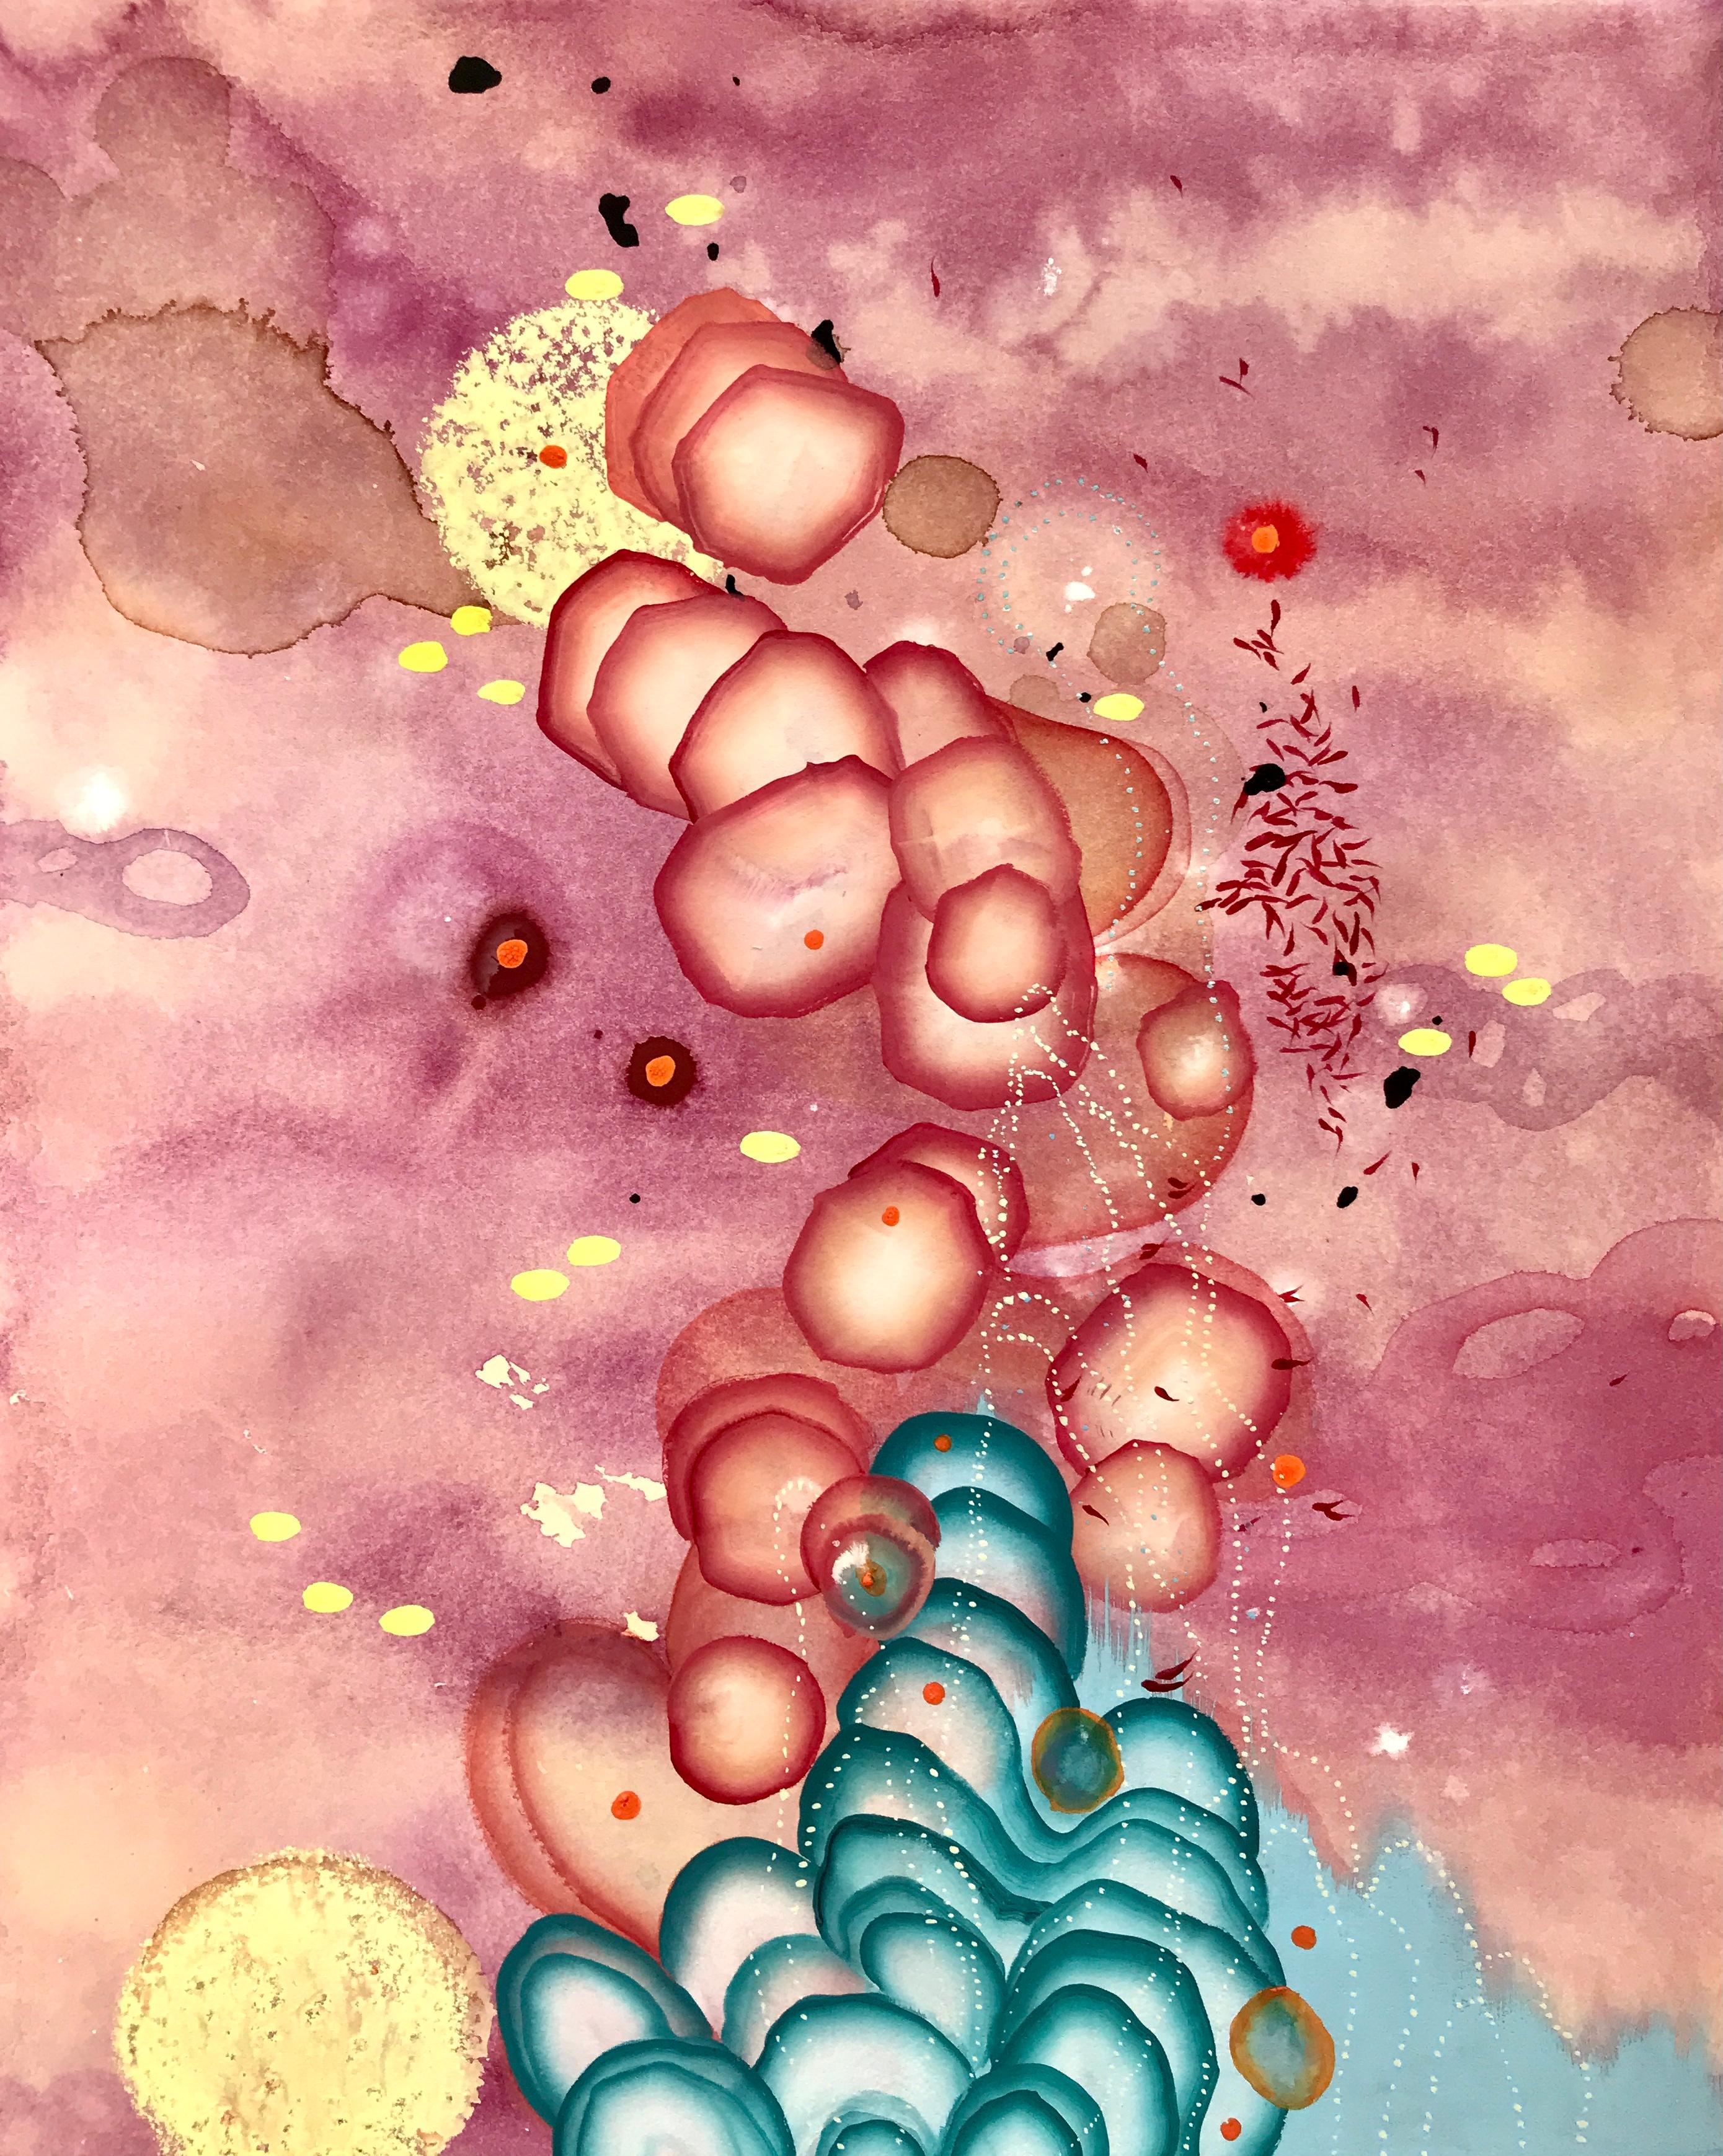 Grayson Chandler Abstract Drawing - "Nucleation Study", Watercolor, Abstract, Contemporary Art, Emerging Artist